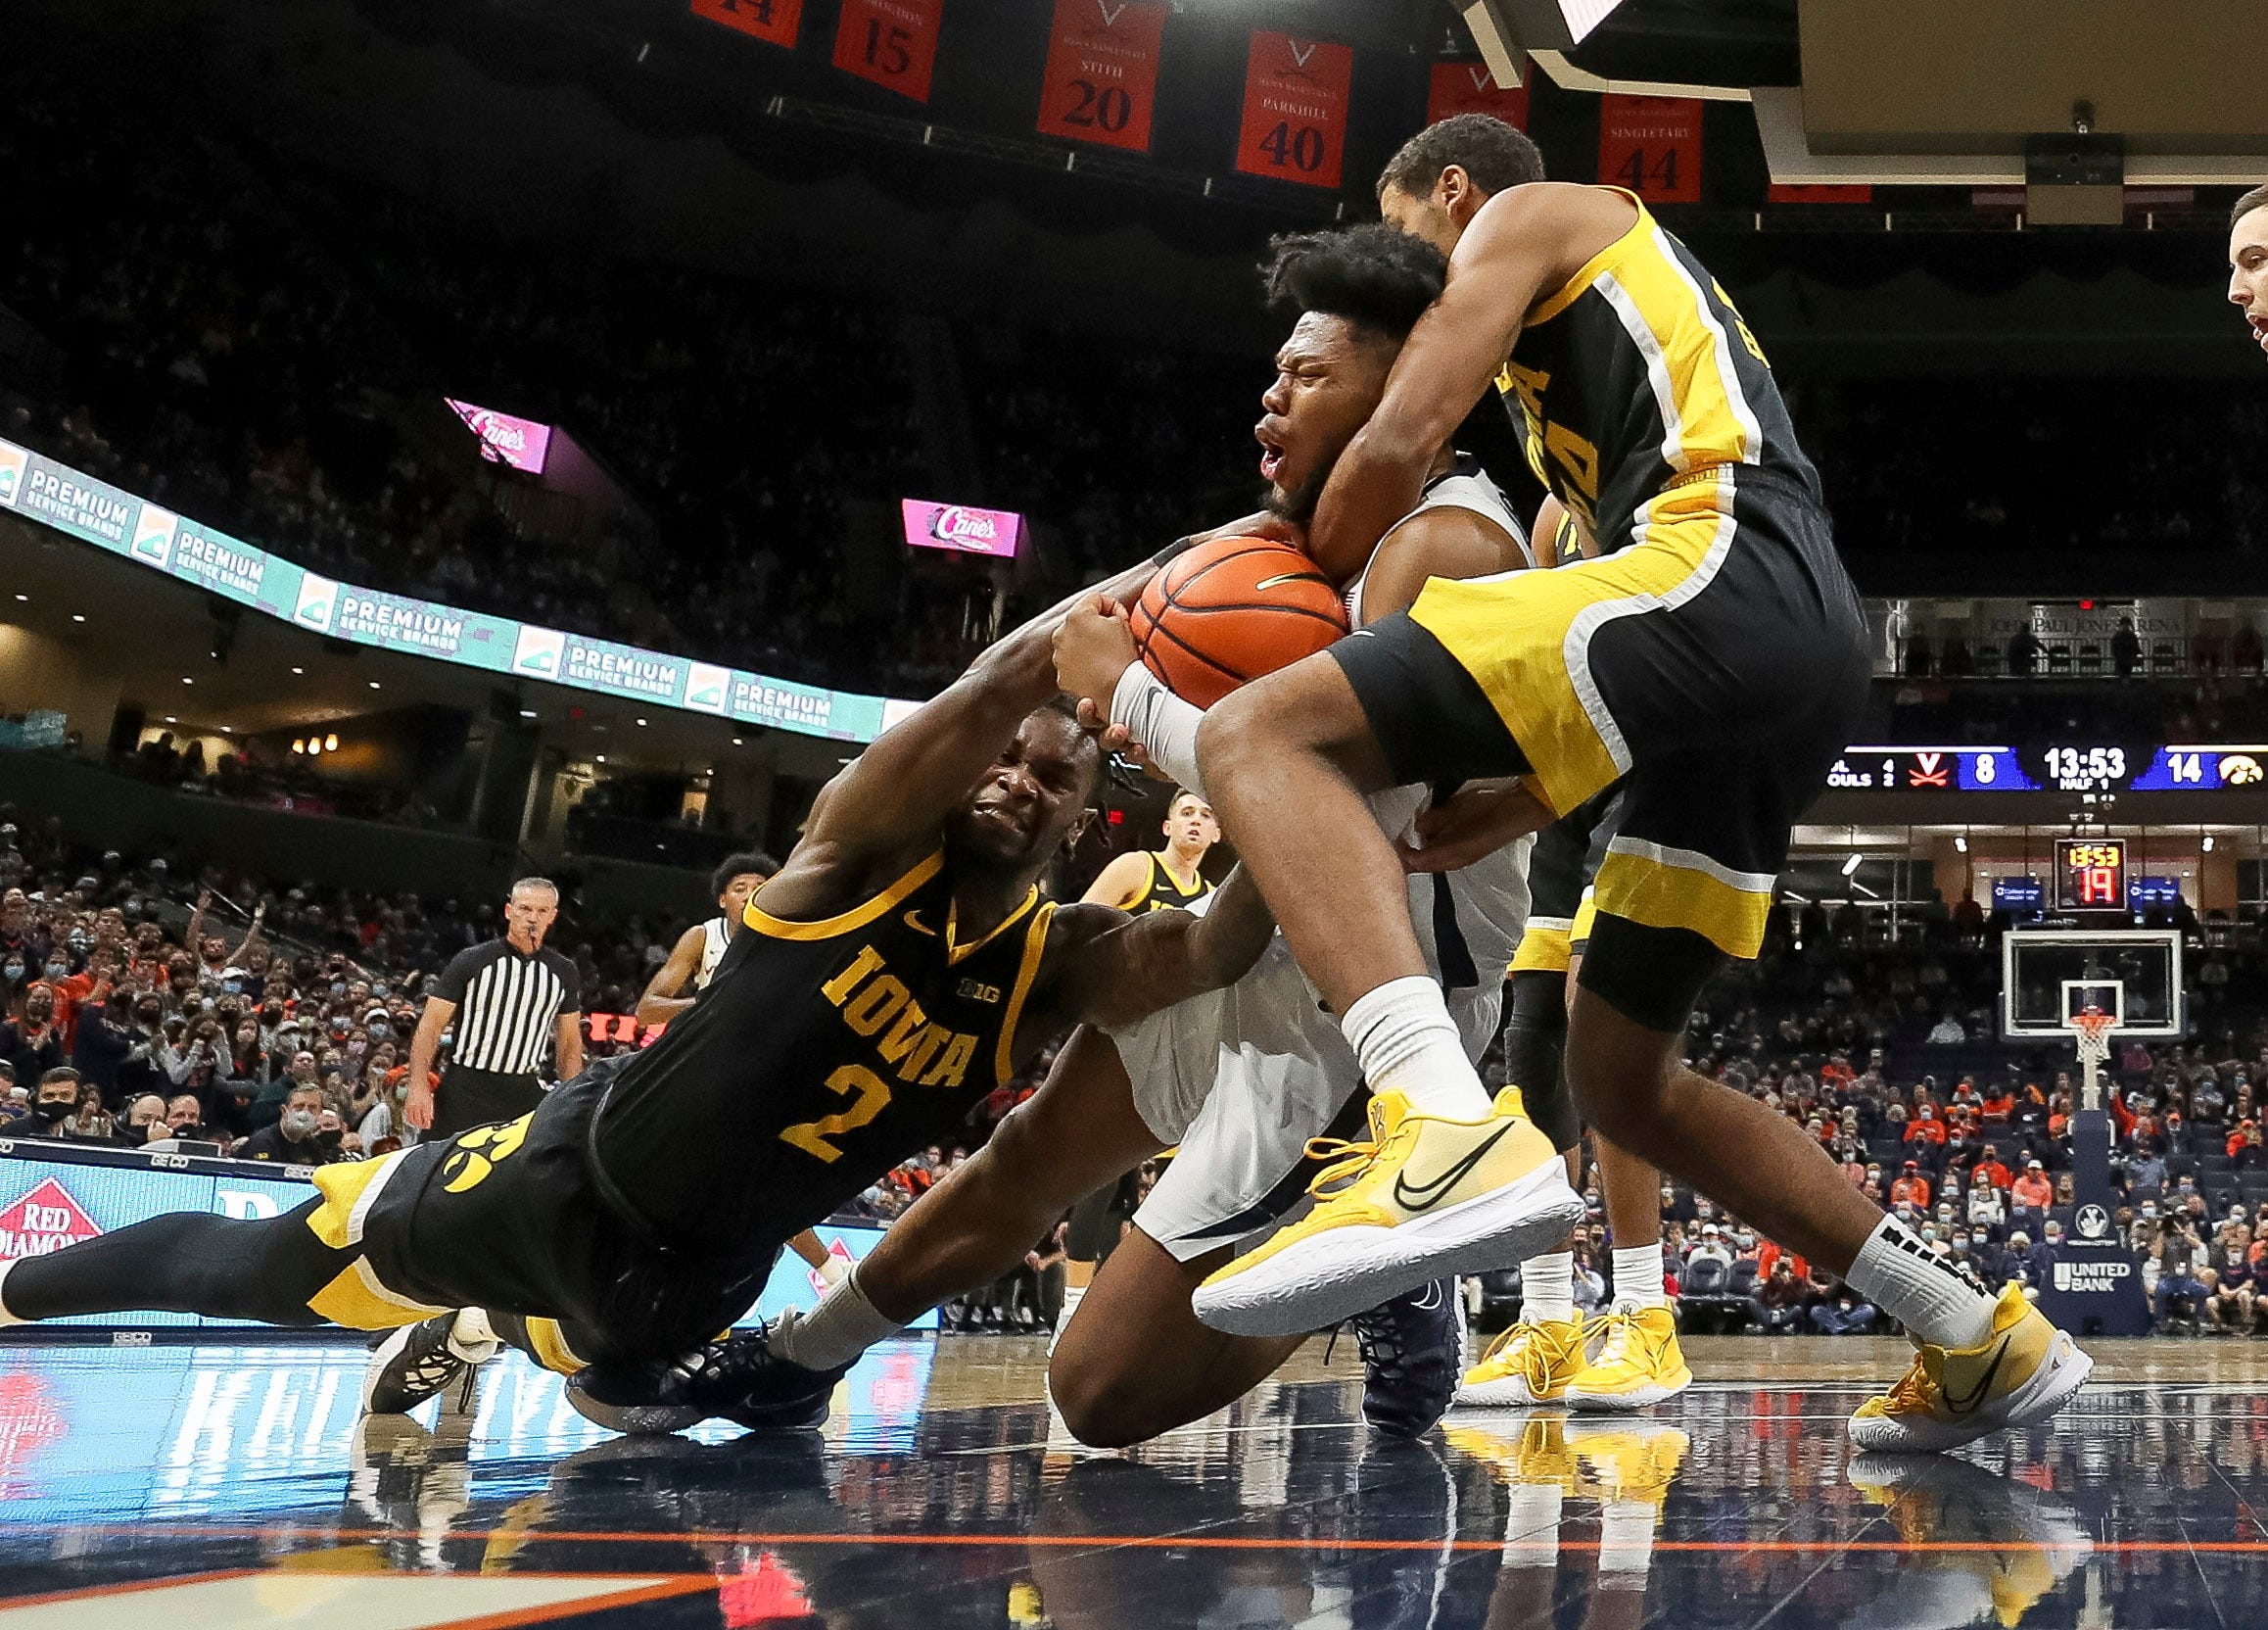 Virginia forward Jayden Gardner (1) is fouled fighting for a loose ball with Iowa guard Joe Toussaint (2) and Iowa forward Kris Murray (24) during the second half of an NCAA college basketball game, Monday, Nov. 29, 2021, in Charlottesville, Va.